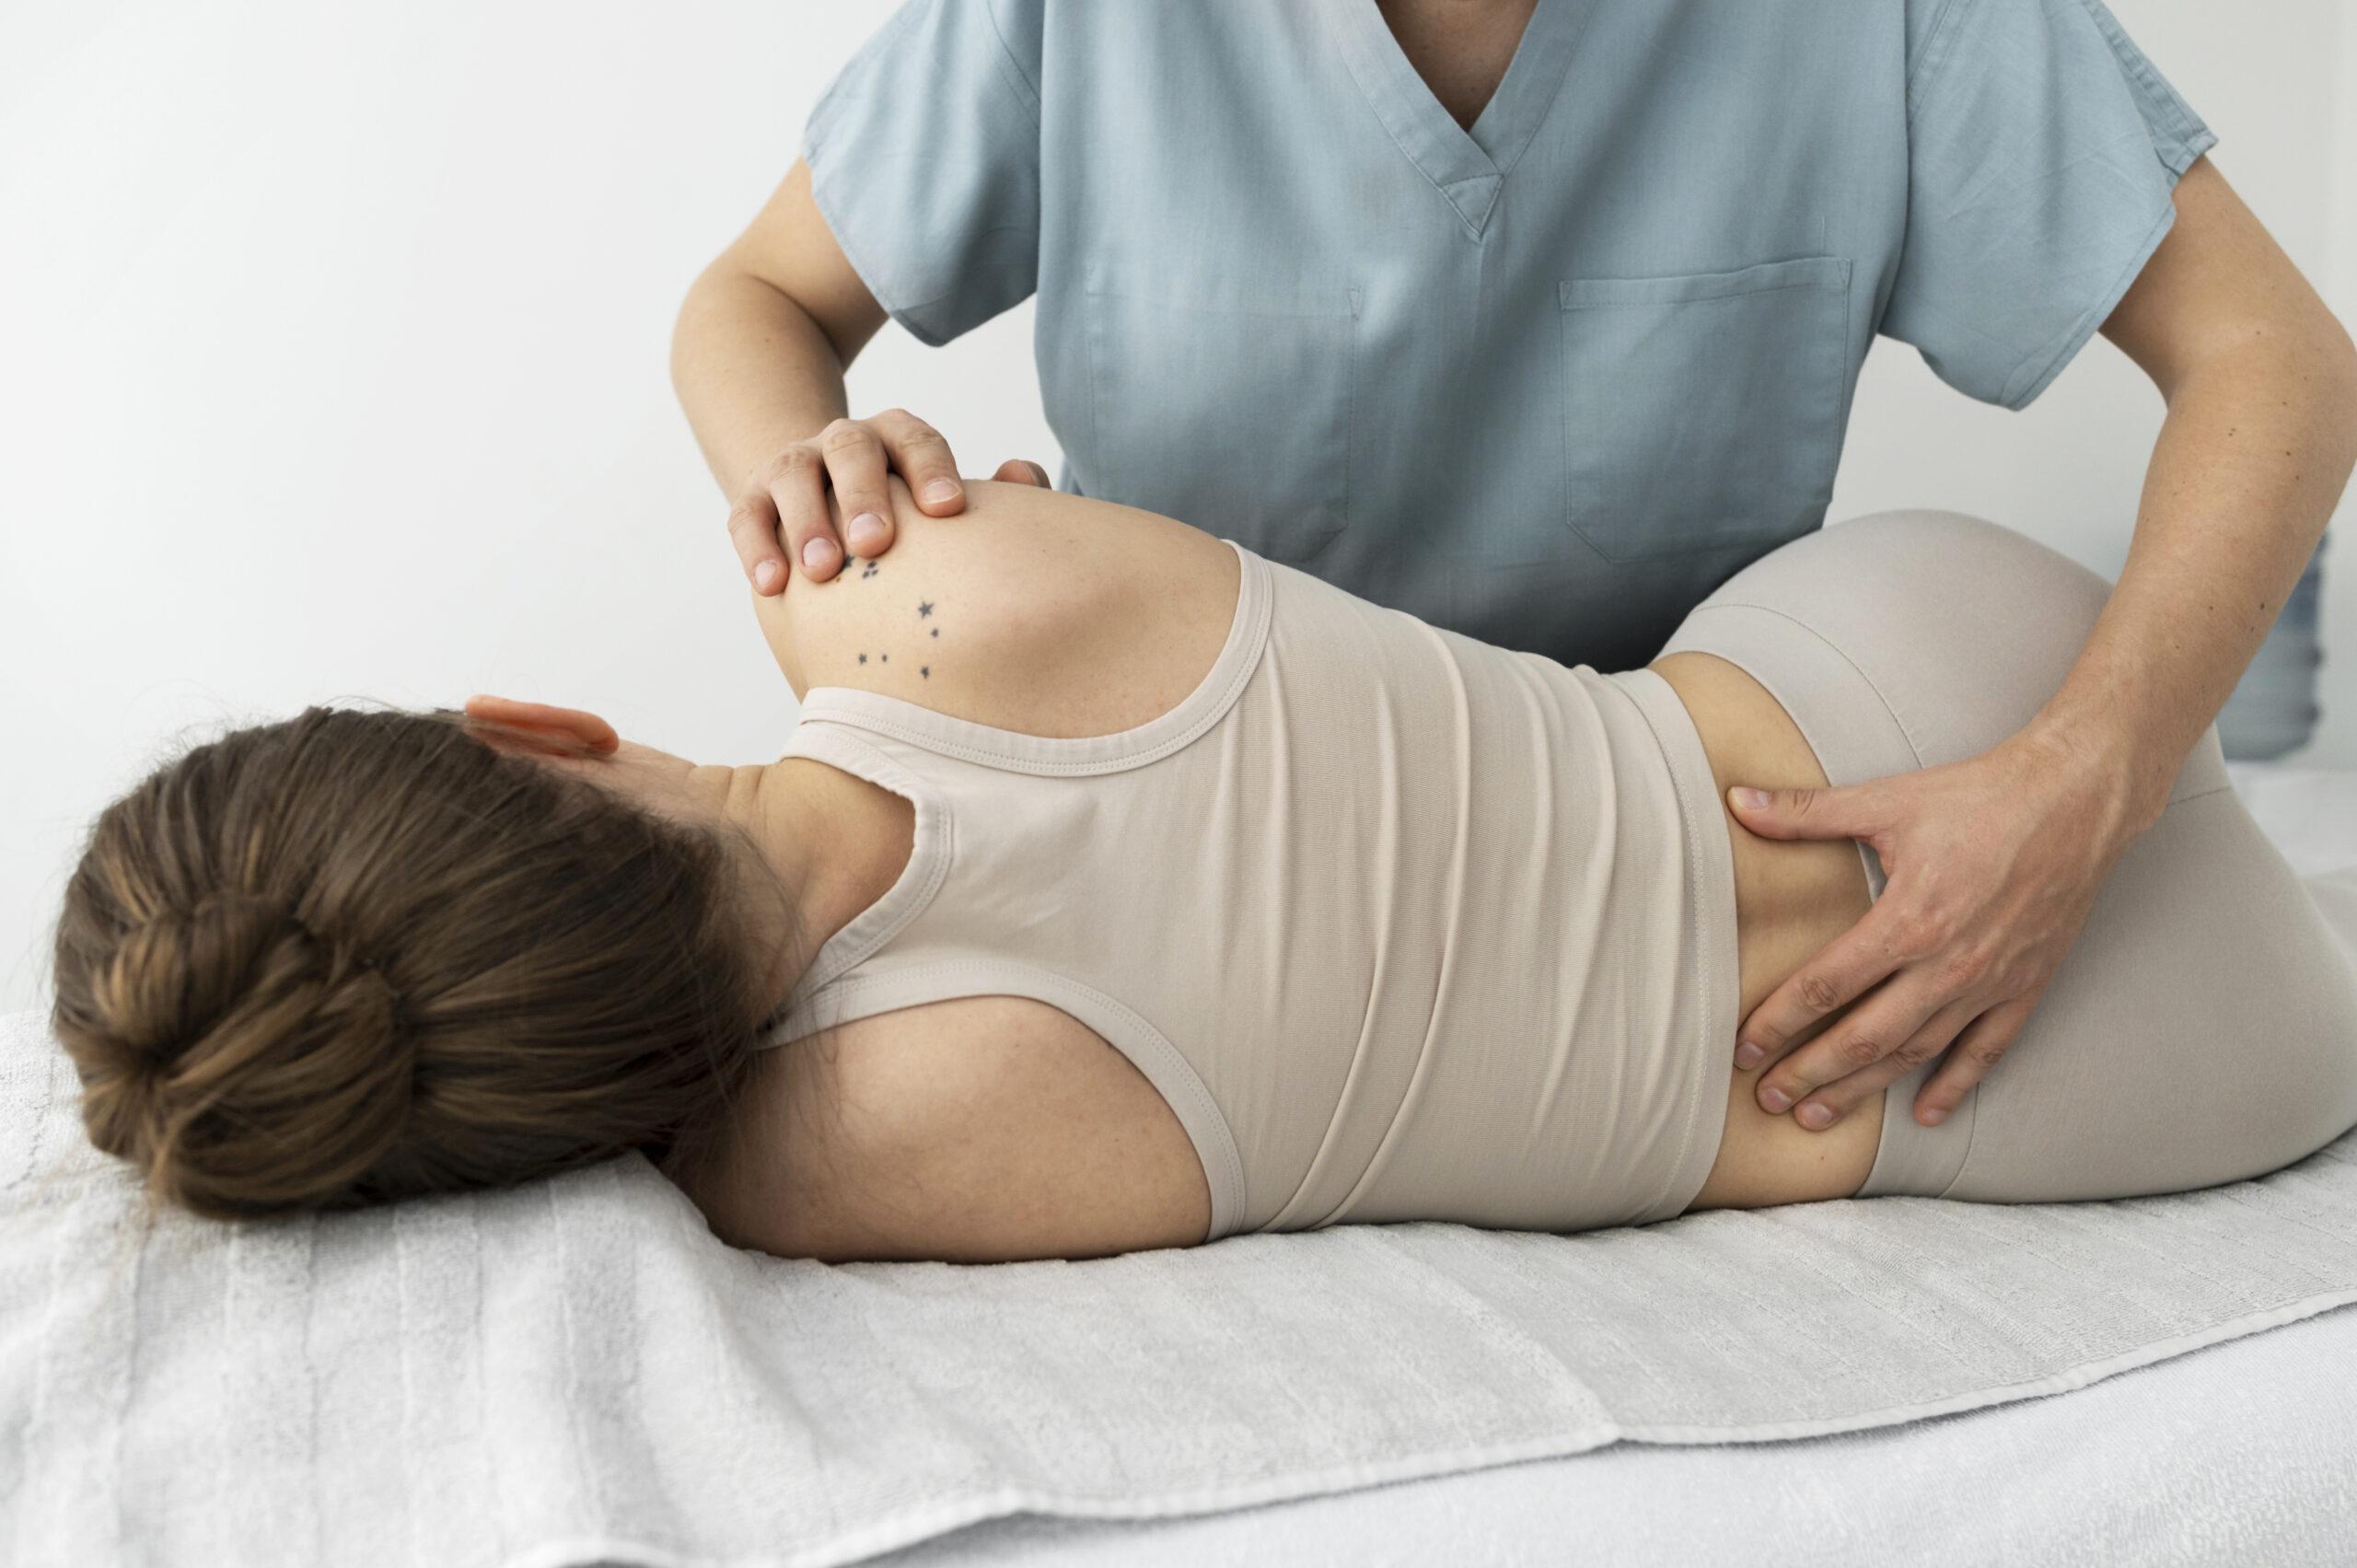 Slipped Disc and Non-Surgical Back Pain Treatments